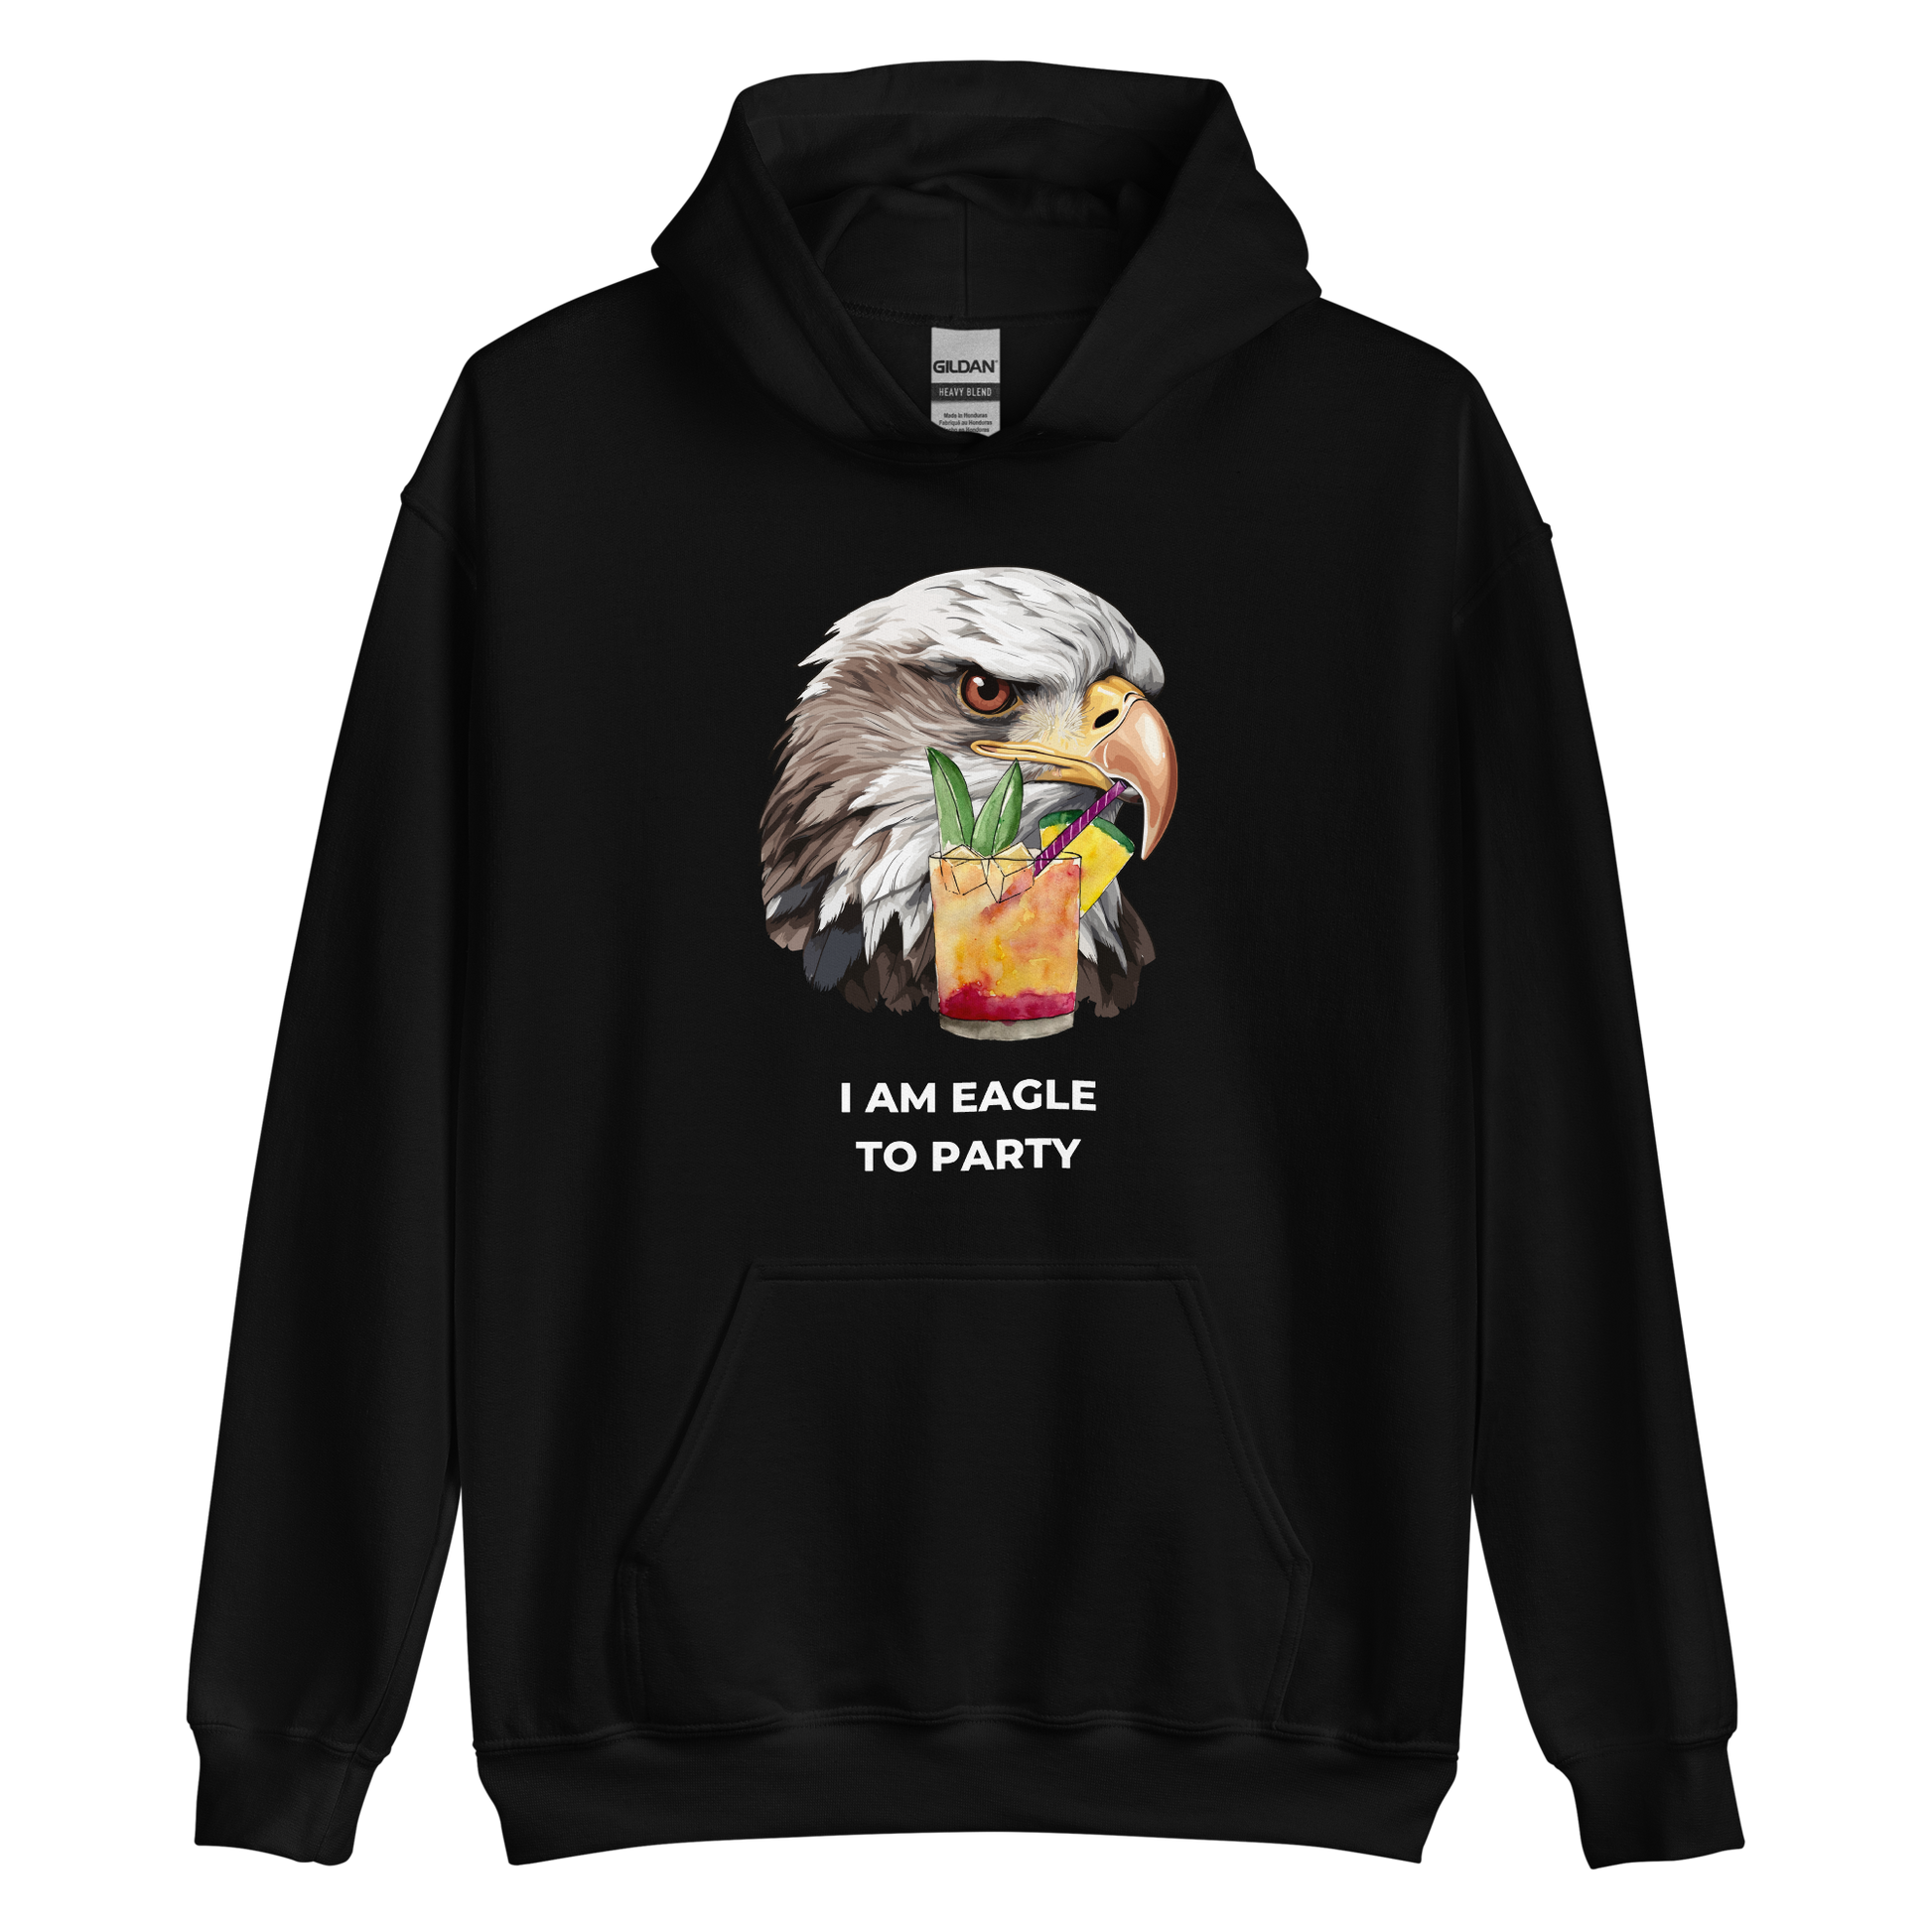 Black Eagle Hoodie featuring a captivating I Am Eagle To Party graphic on the chest - Funny Graphic Eagle Party Hoodies - Boozy Fox